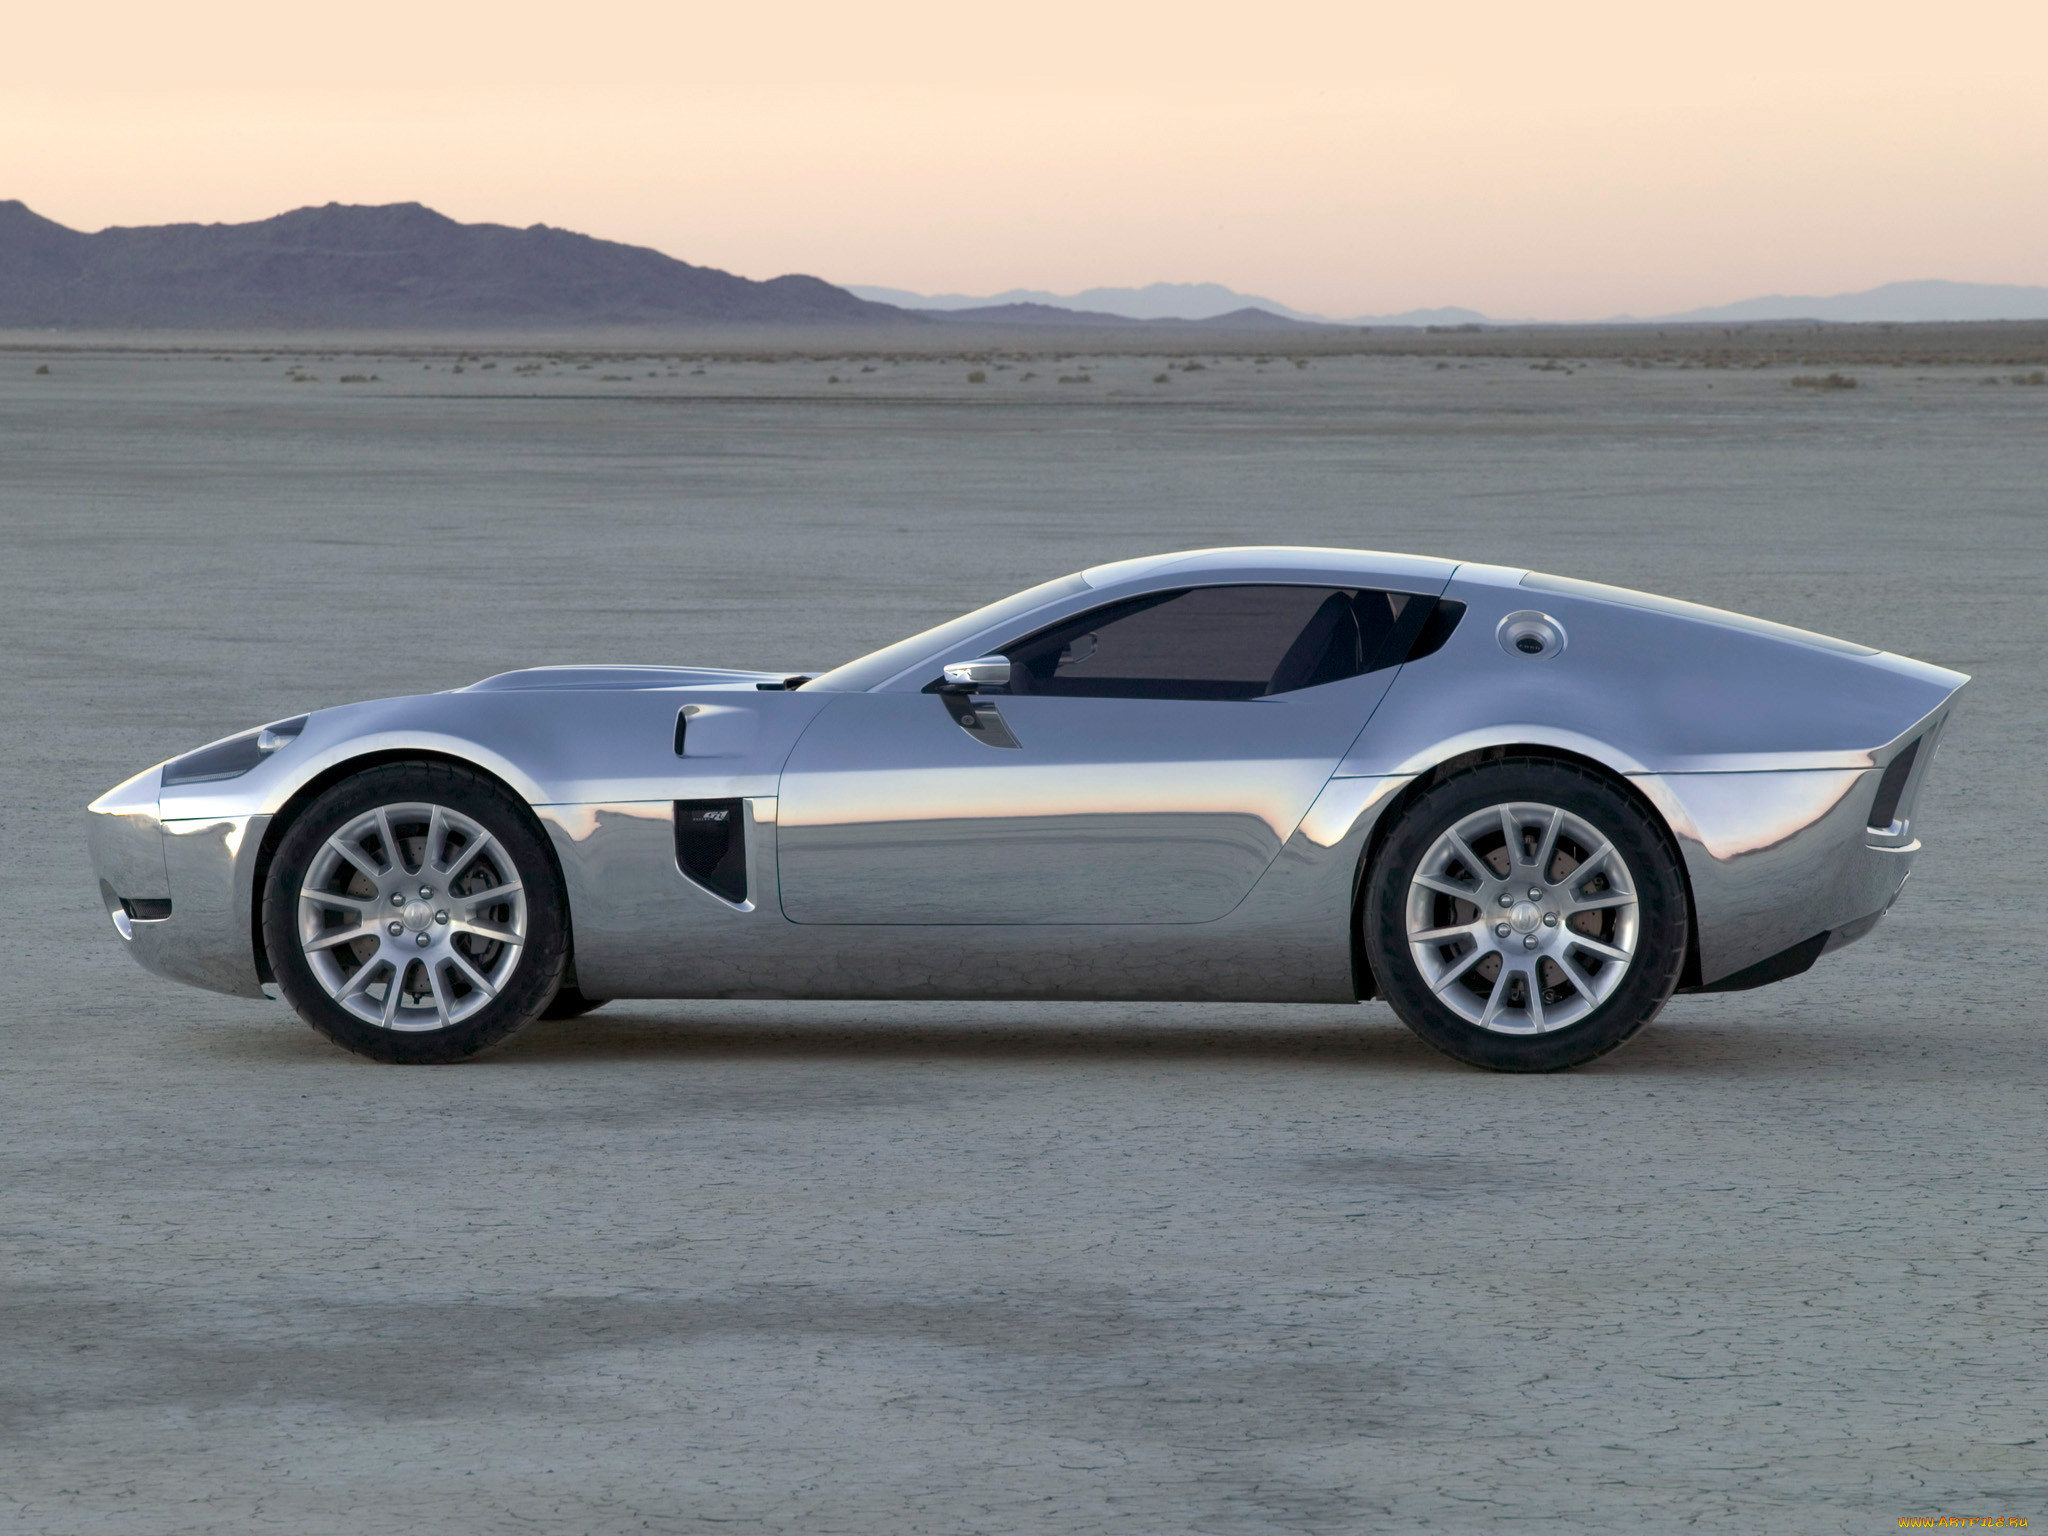 shelby ford gr-1 concept 2005, , ac cobra, shelby, concept, gr-1, ford, 2005